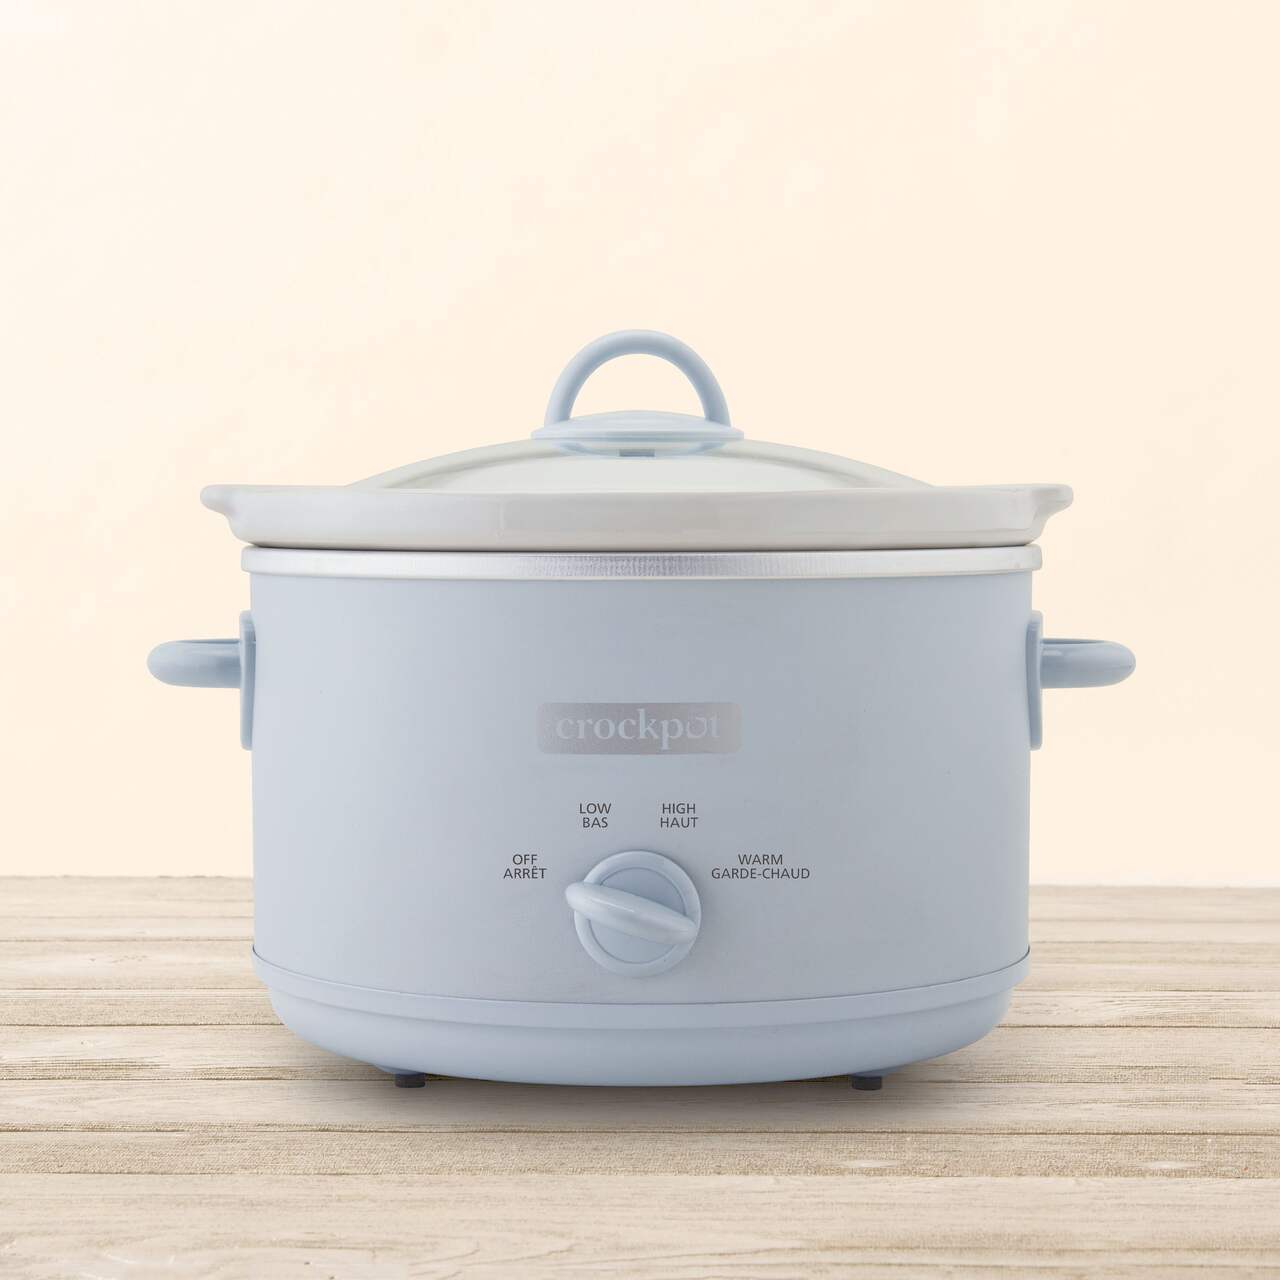 https://media-www.canadiantire.ca/product/living/kitchen/kitchen-appliances/4990040/4-5l-crock-pot-blue-slow-cooker-72a92993-27e4-4f01-9709-36f01f2756bf-jpgrendition.jpg?imdensity=1&imwidth=1244&impolicy=mZoom